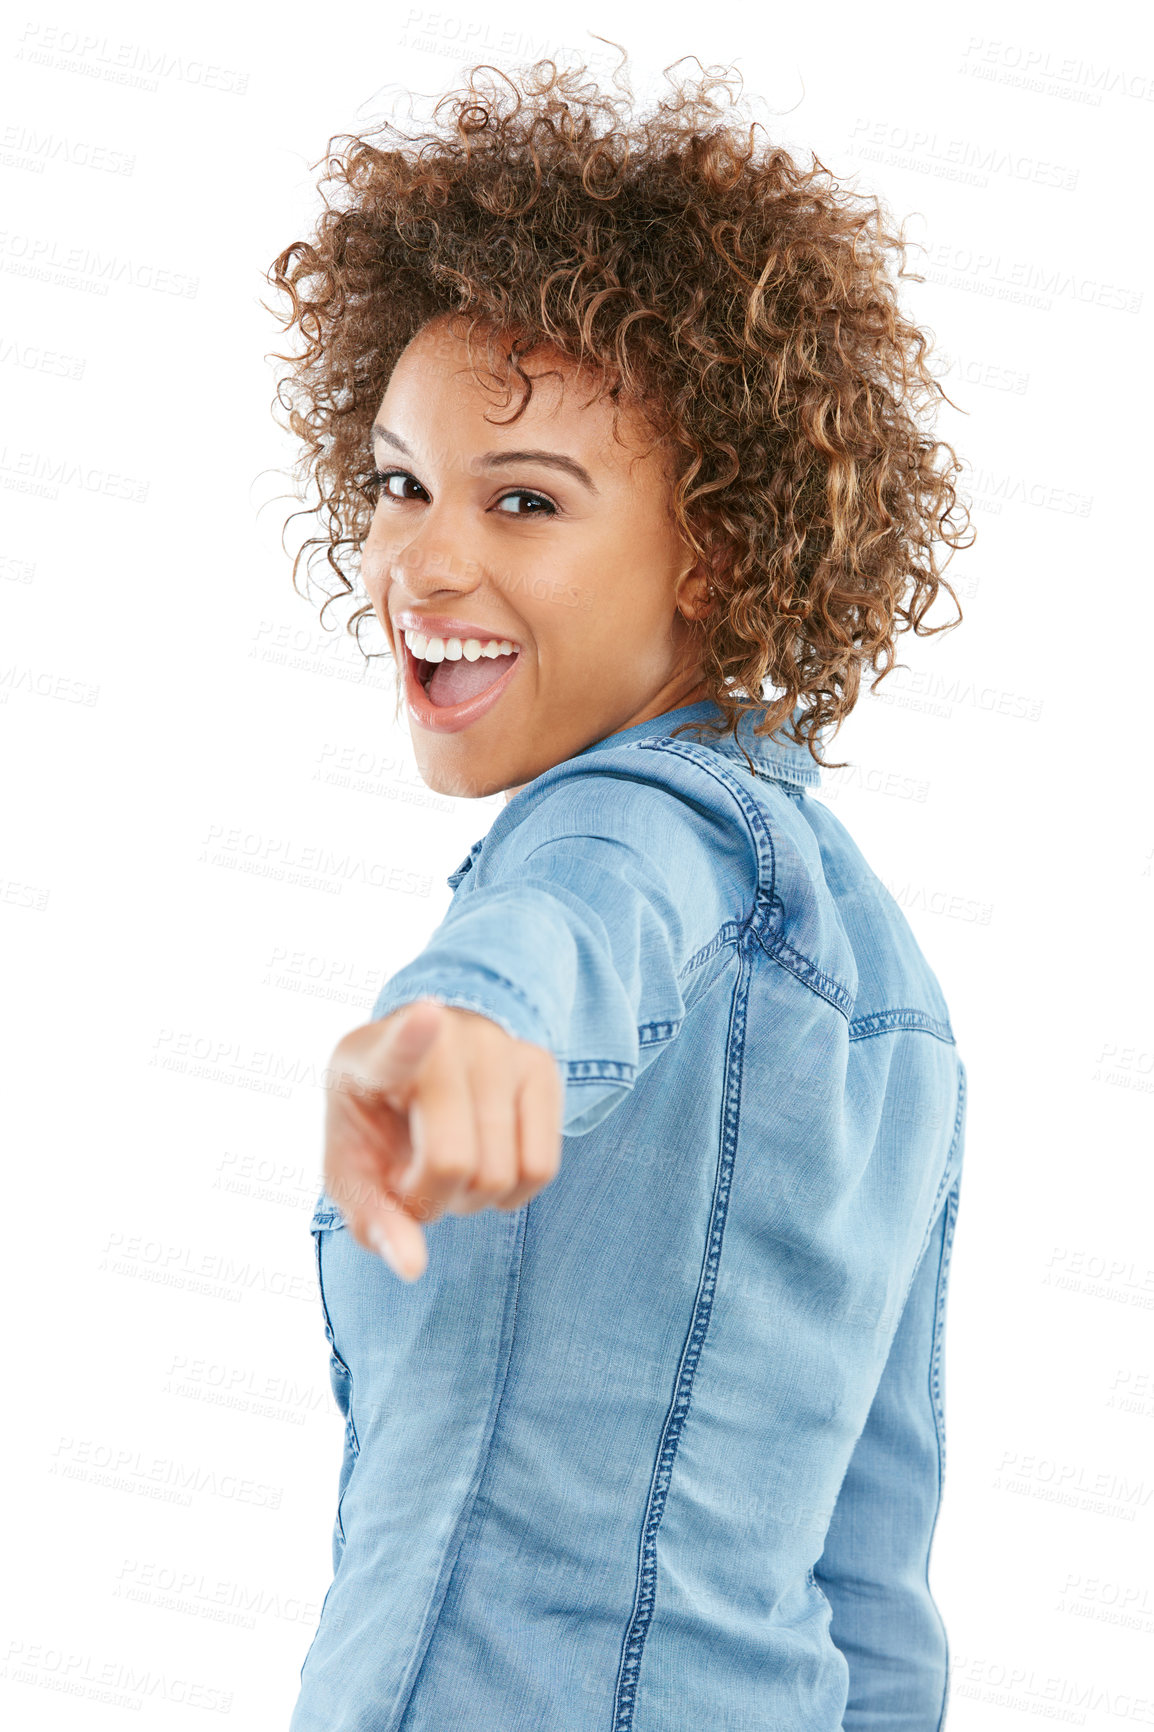 Buy stock photo Studio shot of a young woman pointing towards you